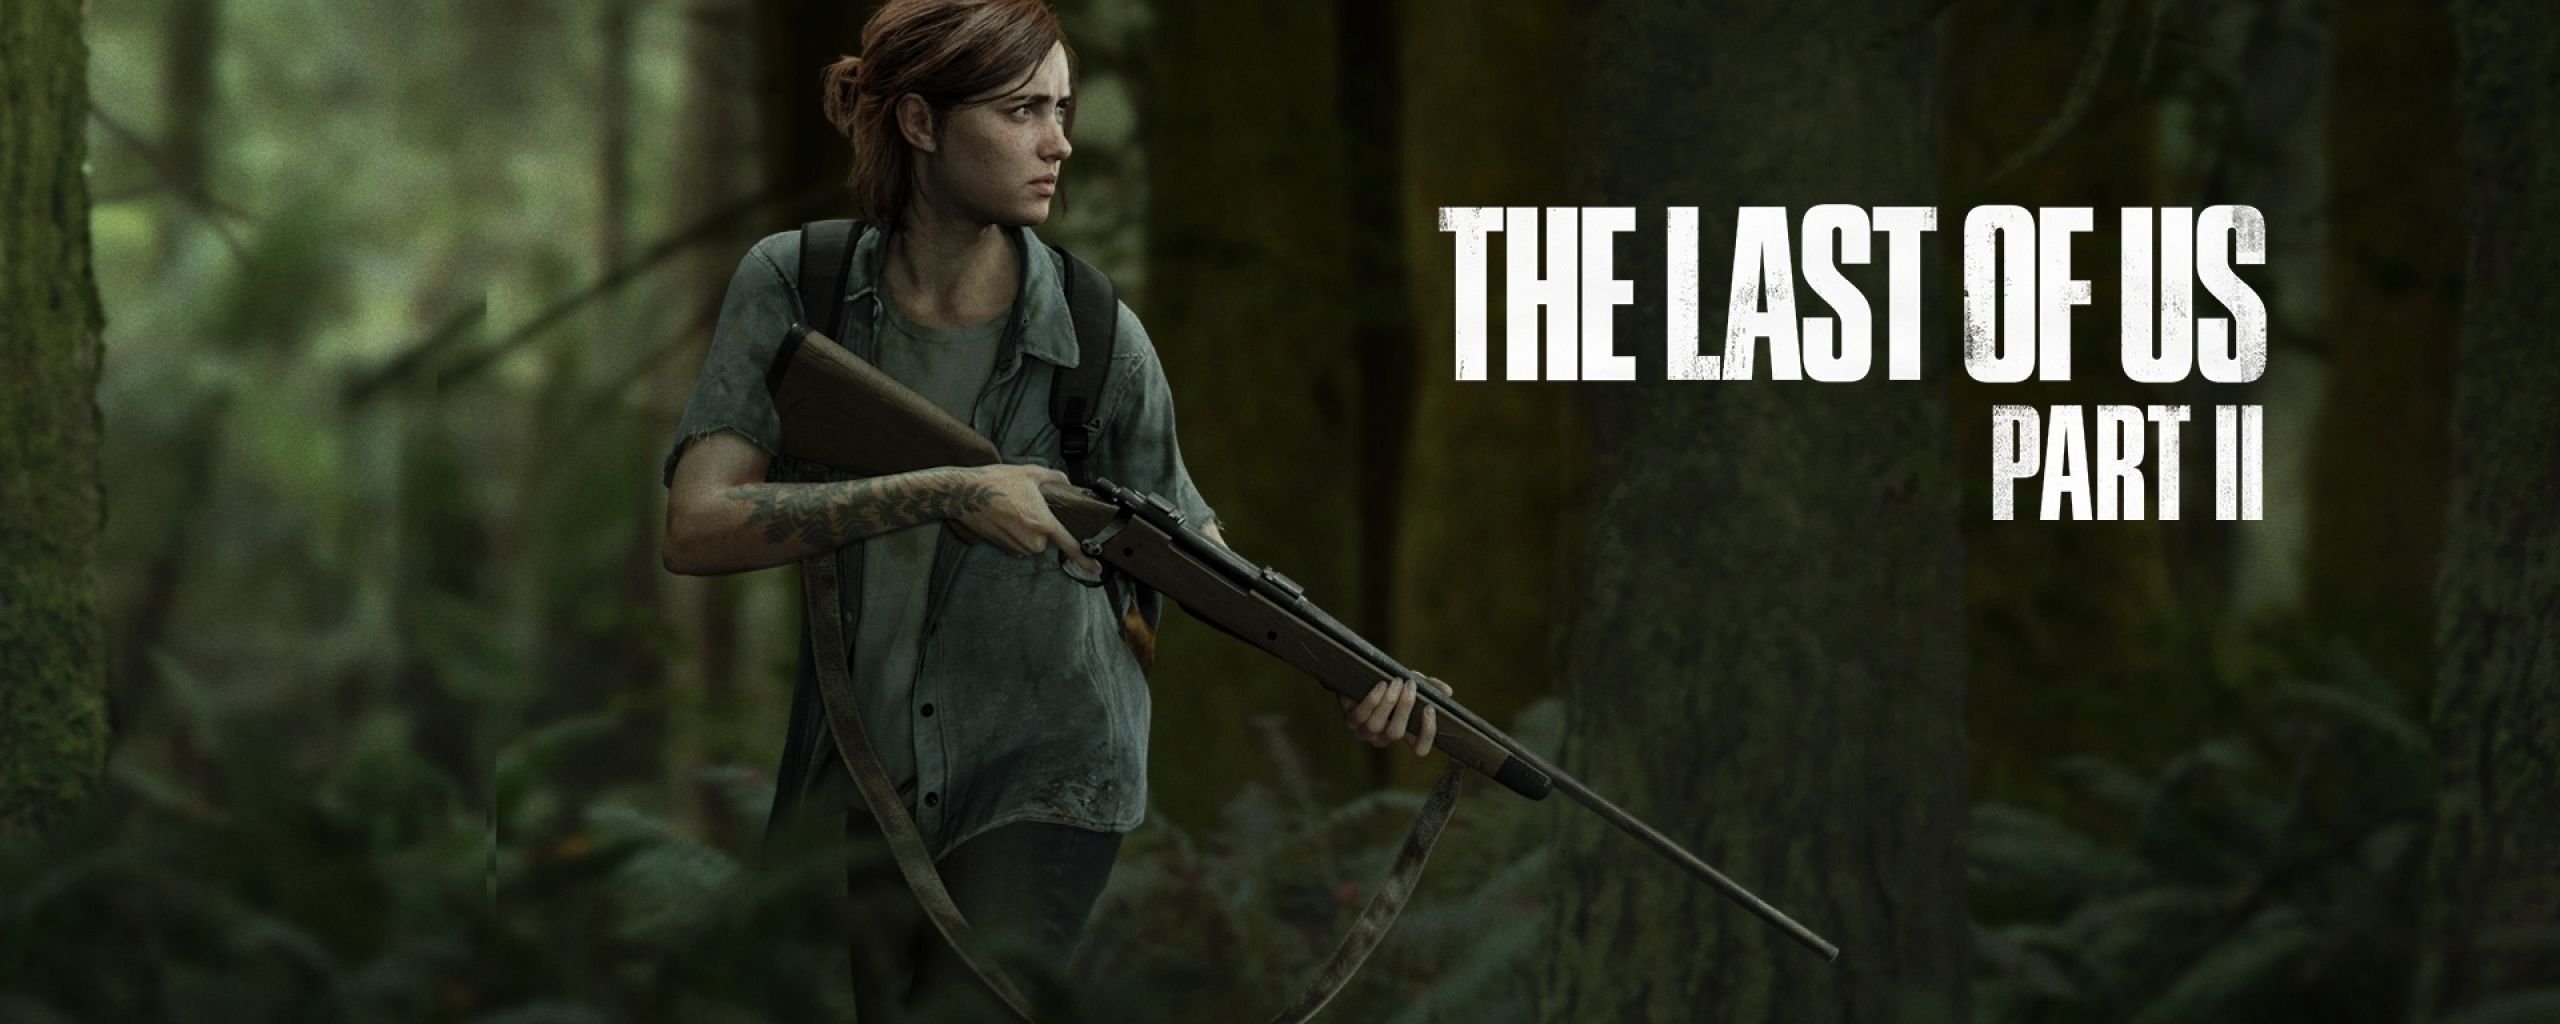 The Last of Us Part 2 PS5 2560x1024 Resolution Wallpaper, HD Games 4K Wallpaper, Image, Photo and Background Den. Cartazes vintage, The last of us, Cartaz